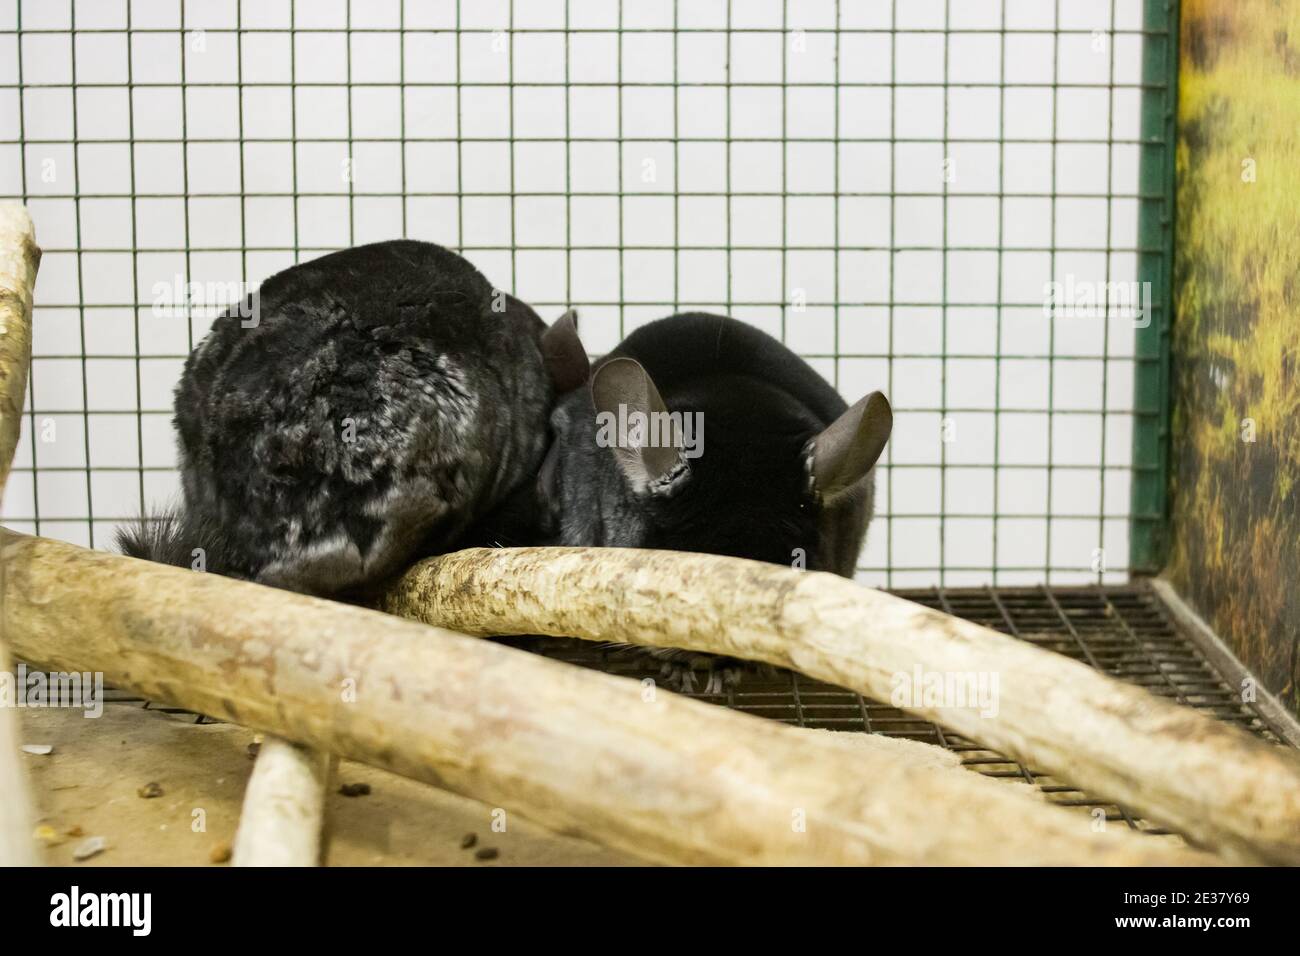 Black and white chinchillas in a cage close up Stock Photo